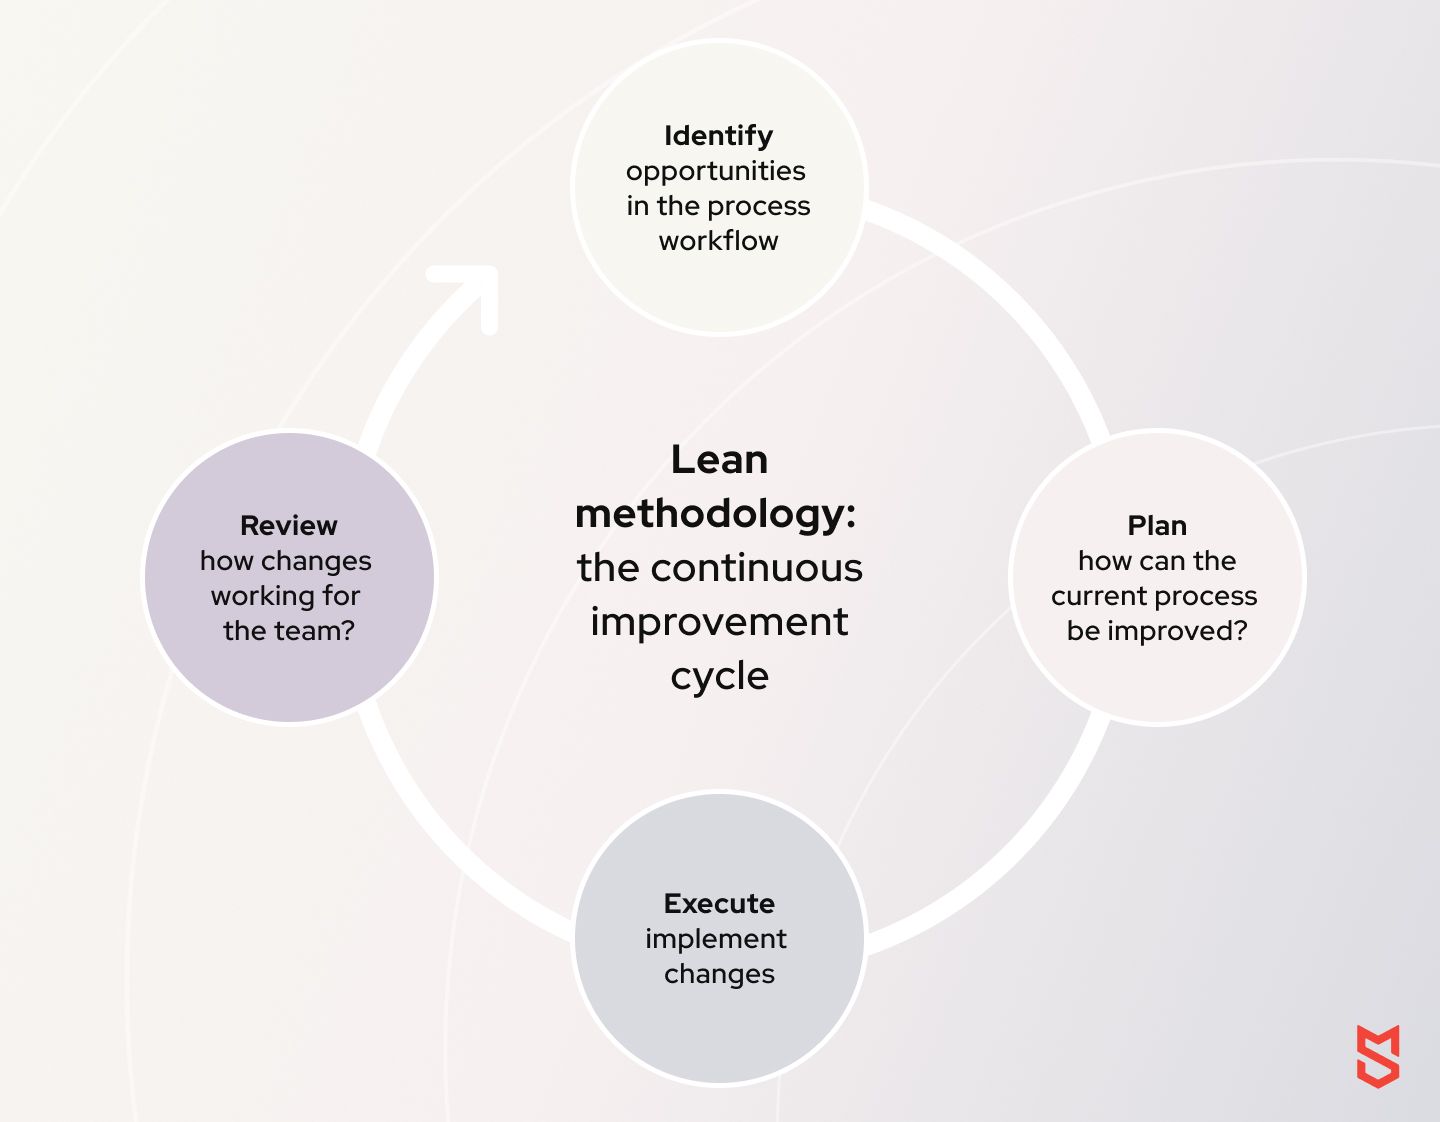 Lean methodology: The continuous improvement cycle 